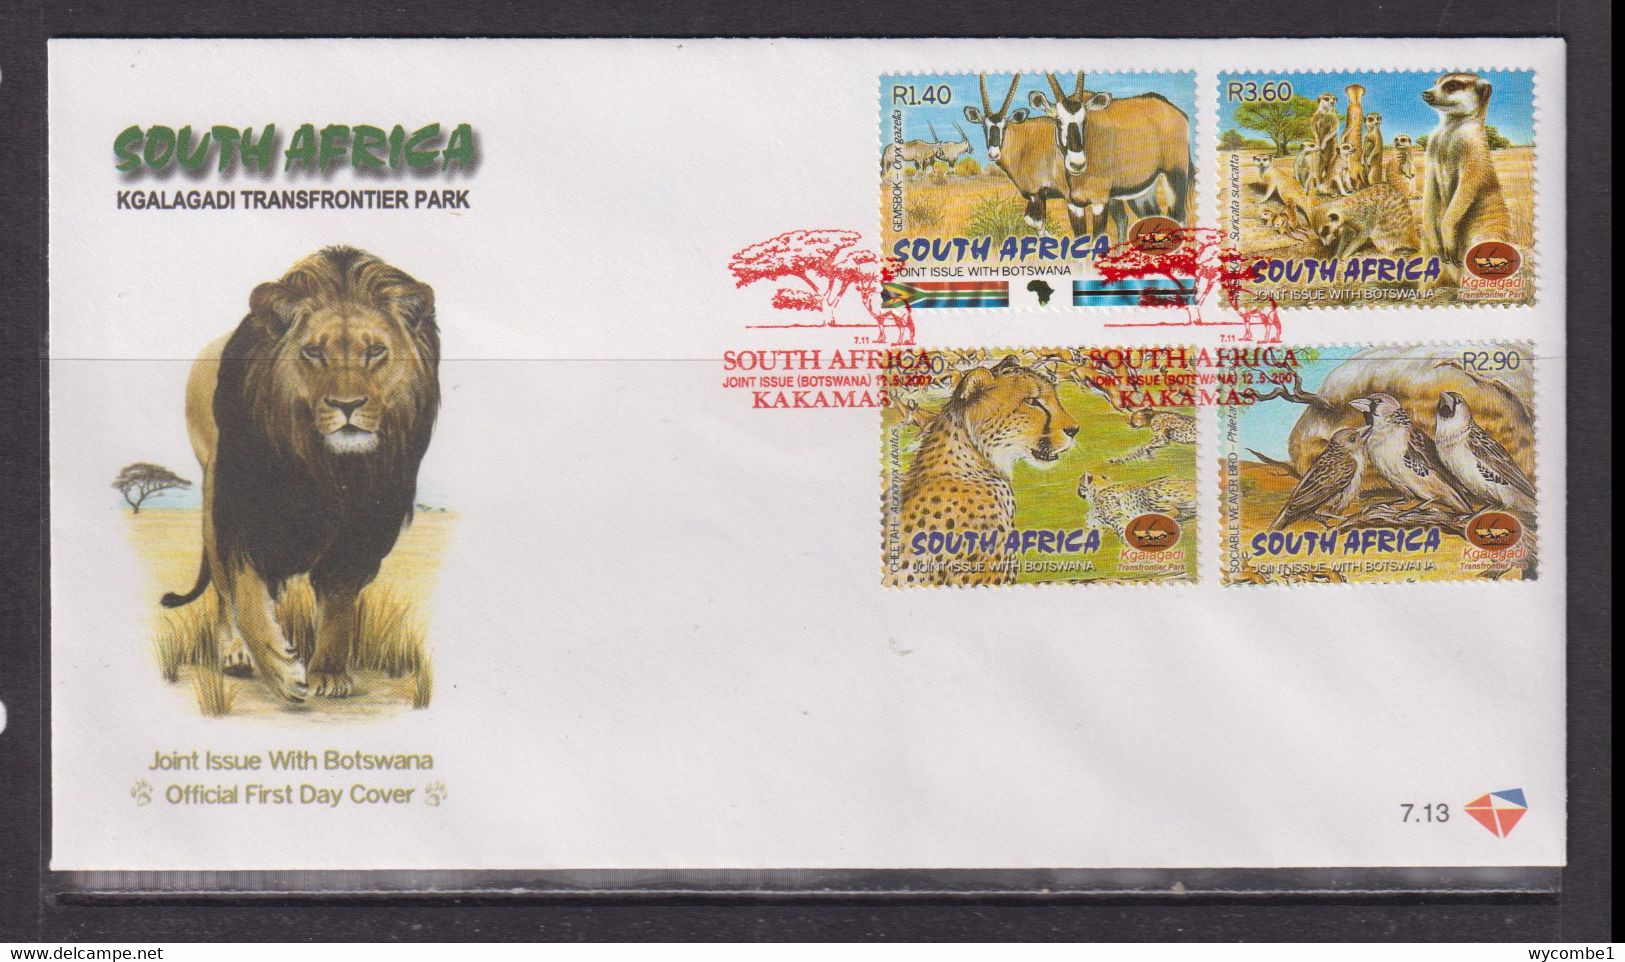 SOUTH AFRICA - 2001 Kgalagadi Transfrontier Park FDC As Scan - Storia Postale